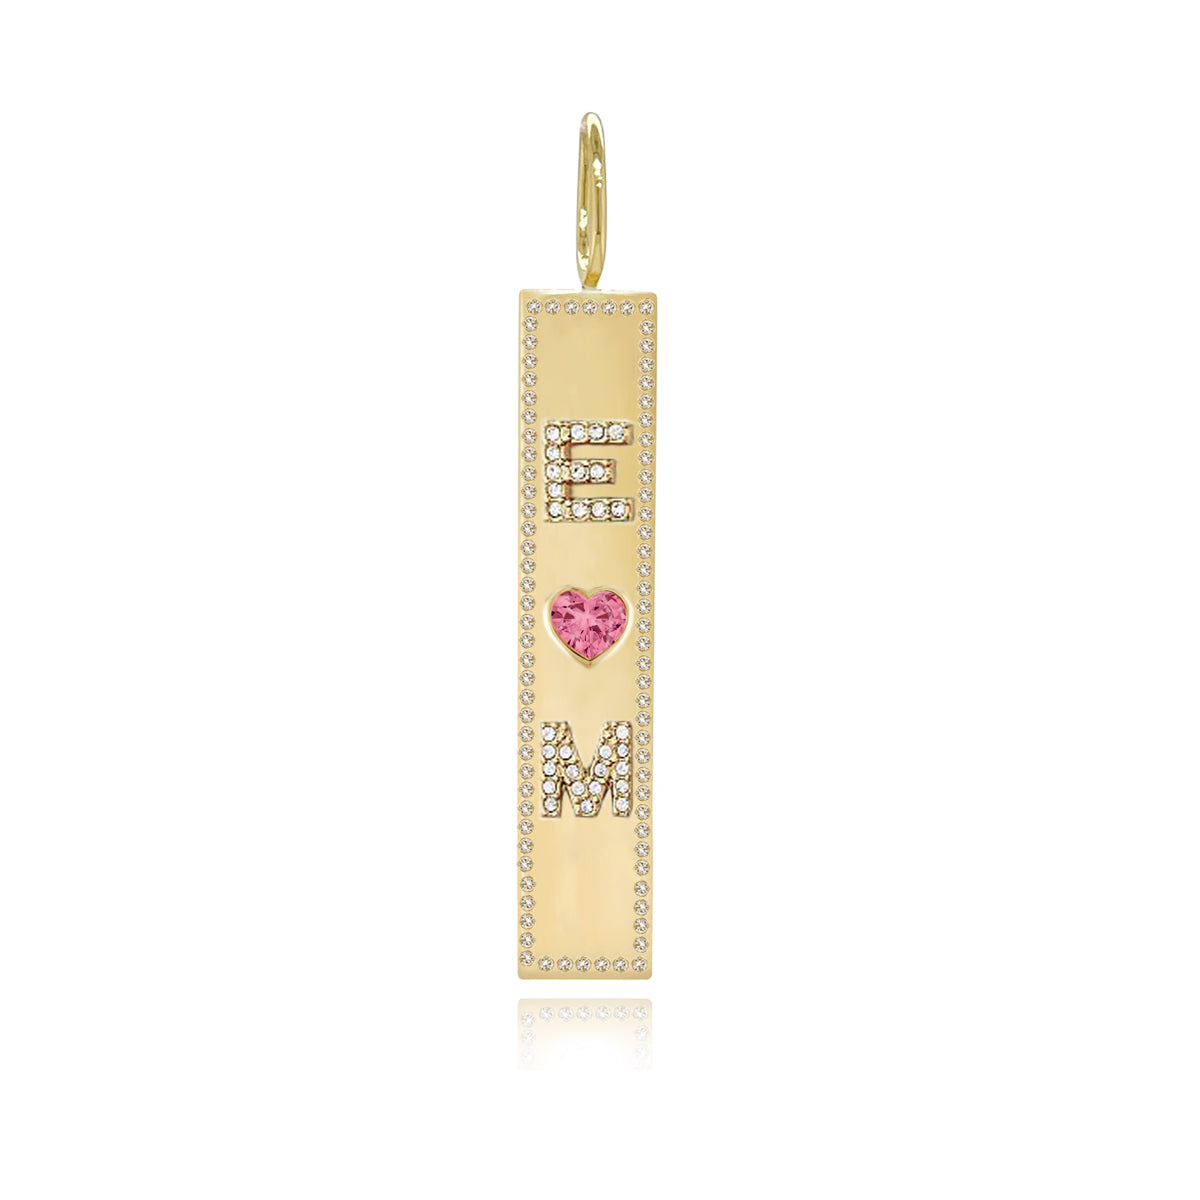 Image of Heart Gemstone and Personalized Pave Charm